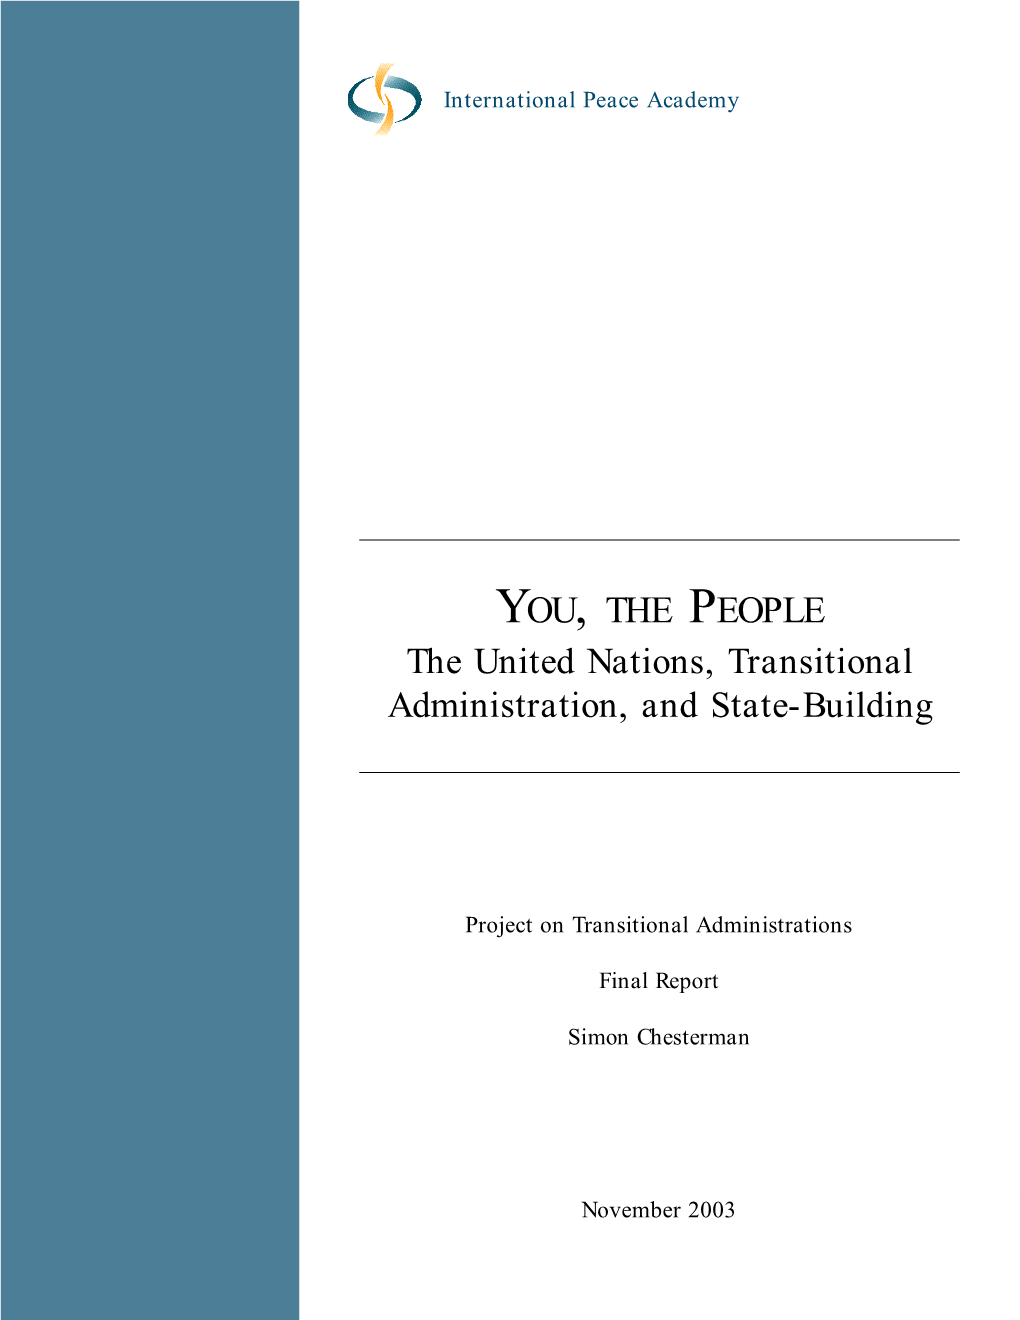 YOU, the PEOPLE the United Nations, Transitional Administration, and State-Building